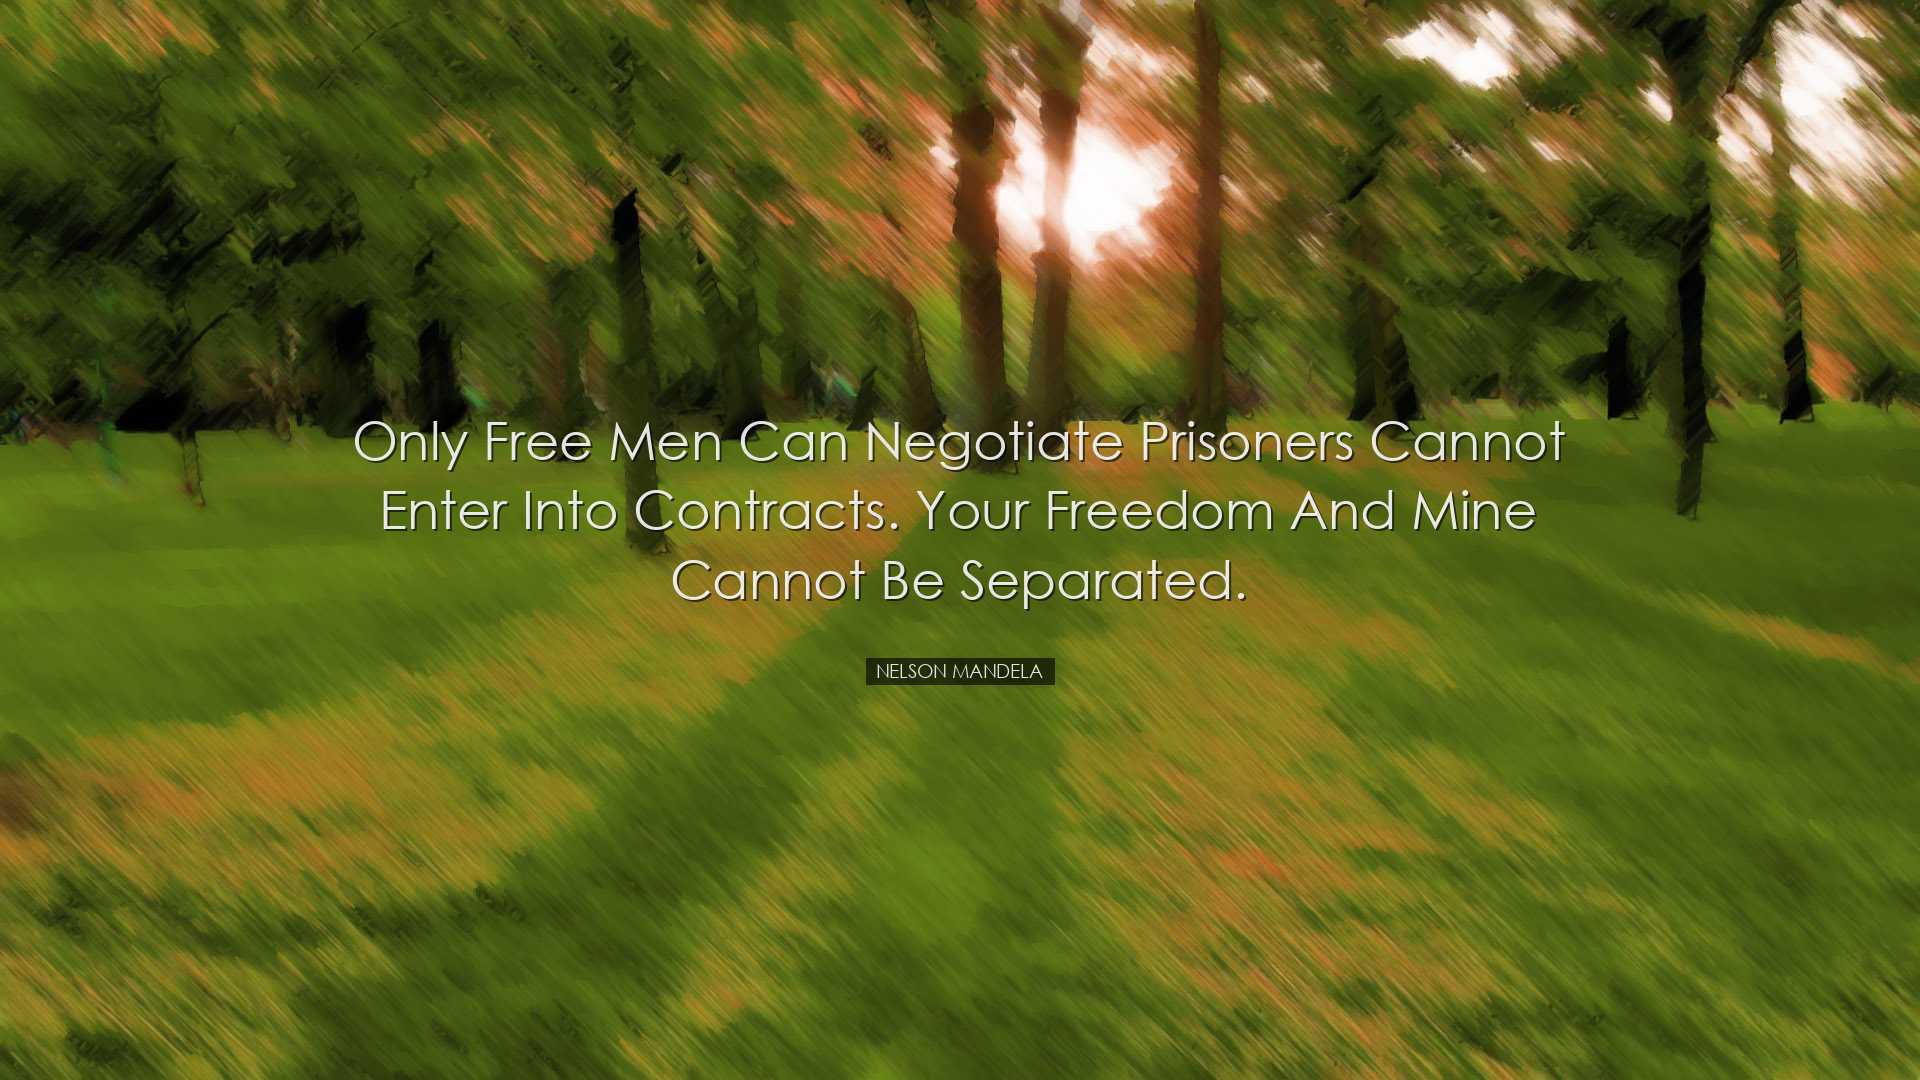 Only free men can negotiate prisoners cannot enter into contracts.